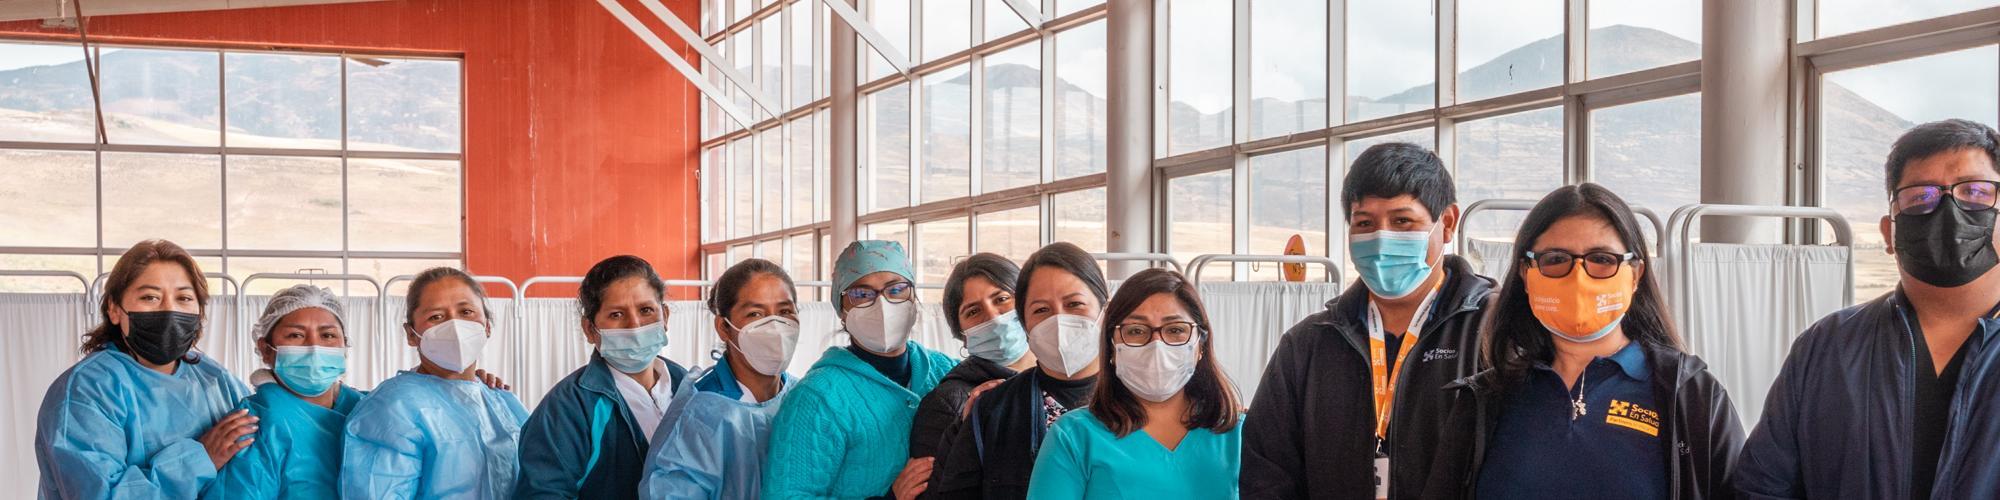 Healthcare workers stand ready in Peru